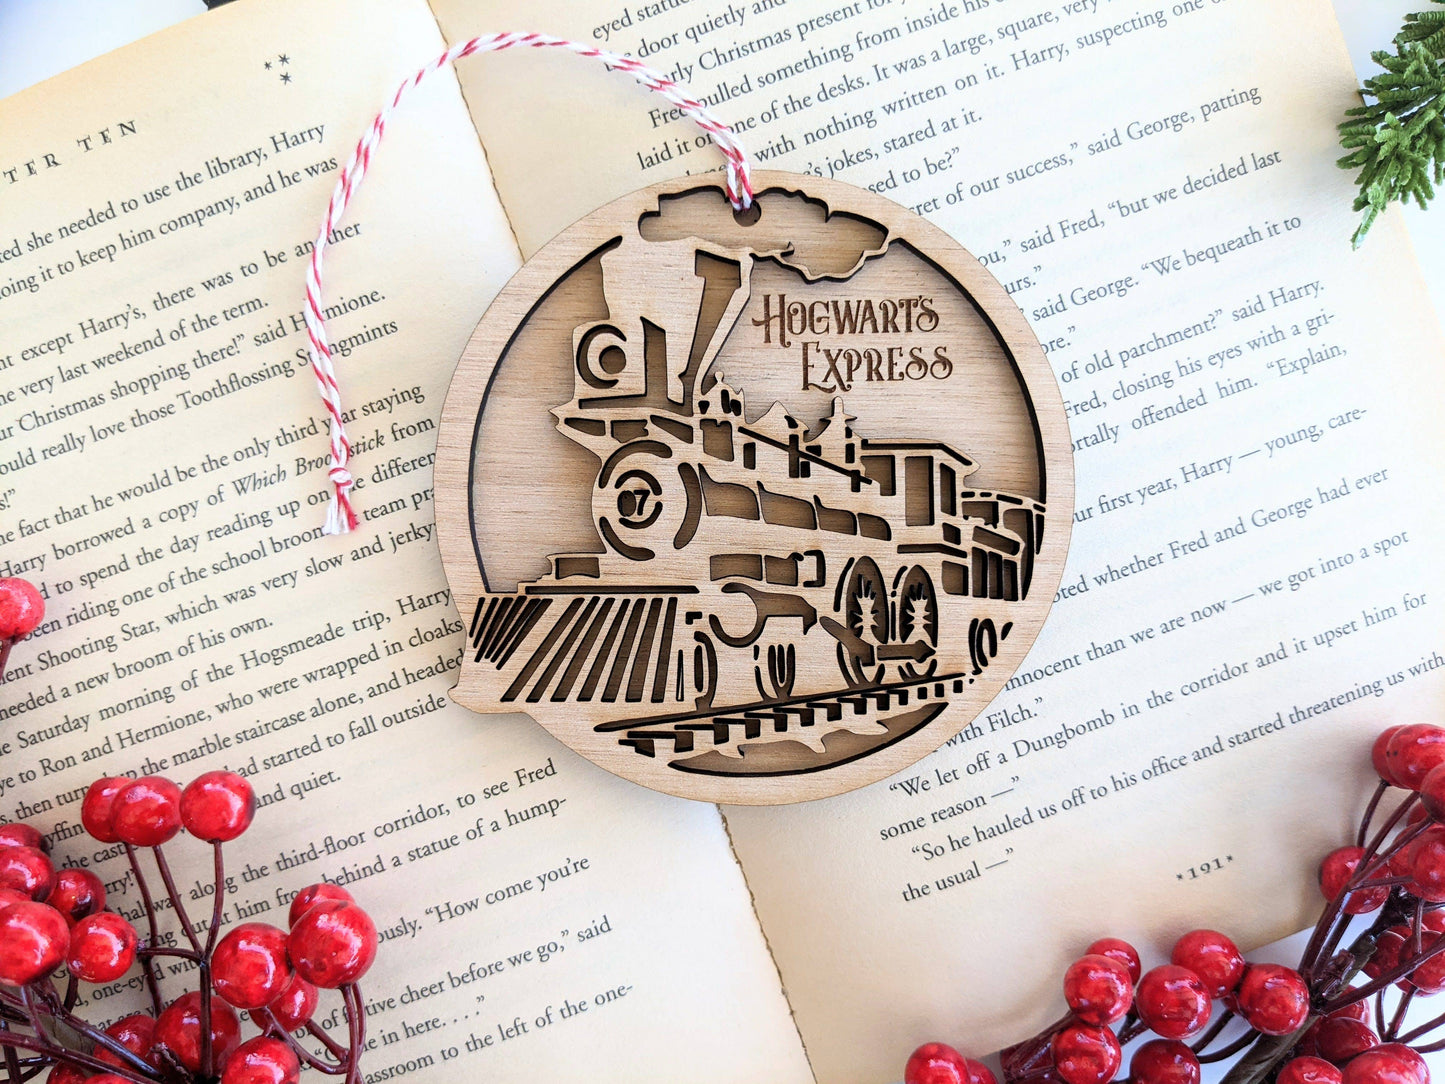 Hogwarts Express - Harry Potter Inspired Layered Ornament